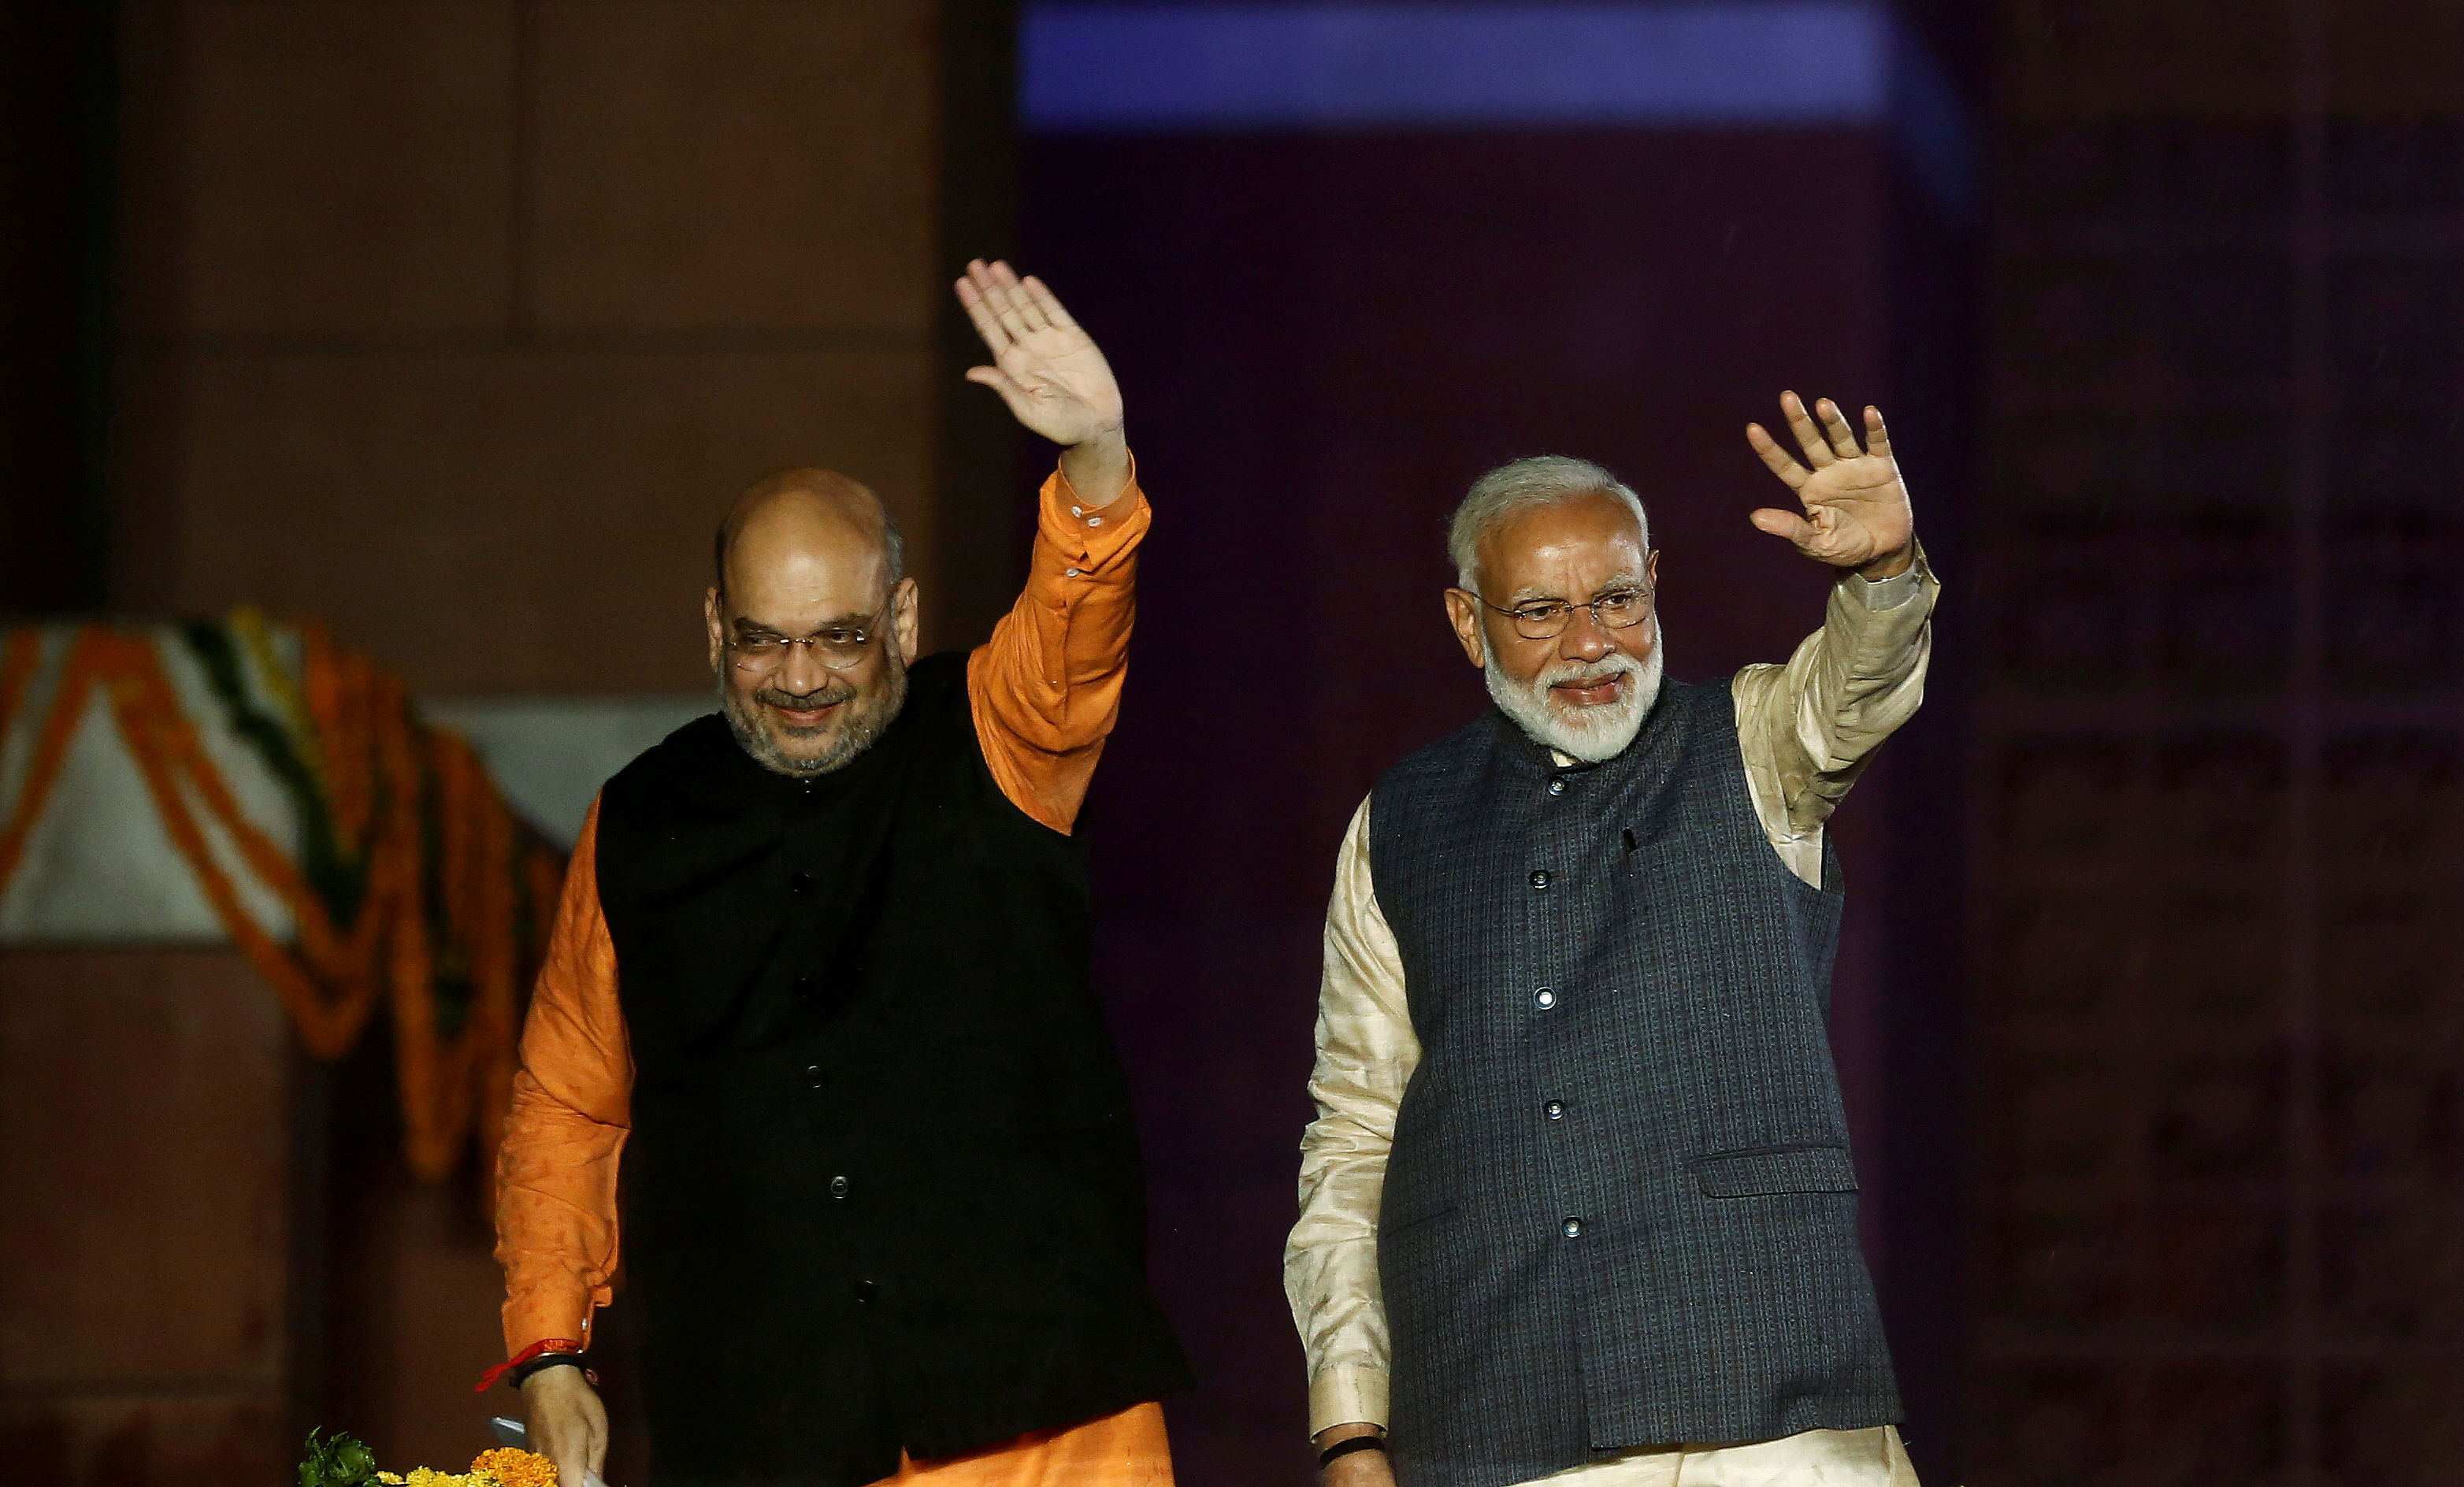 Indian Prime Minister Narendra Modi and Bharatiya Janata Party (BJP) President Amit Shah wave towards their supporters after the election results at party headquarter in New Delhi. (Reuters Photo)